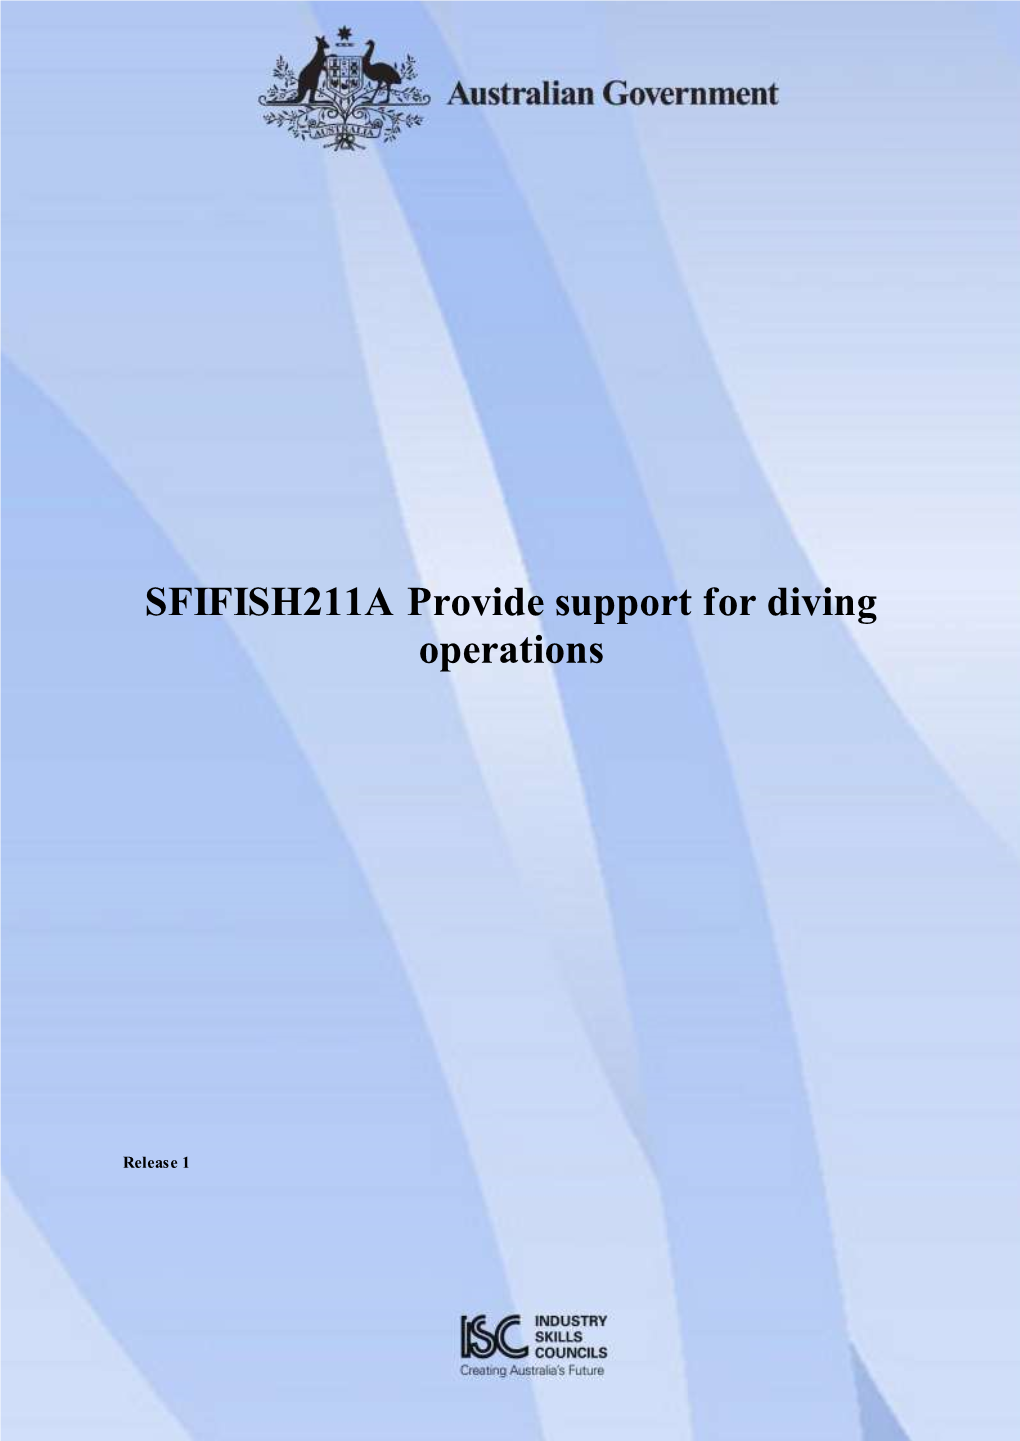 SFIFISH211A Provide Support for Diving Operations